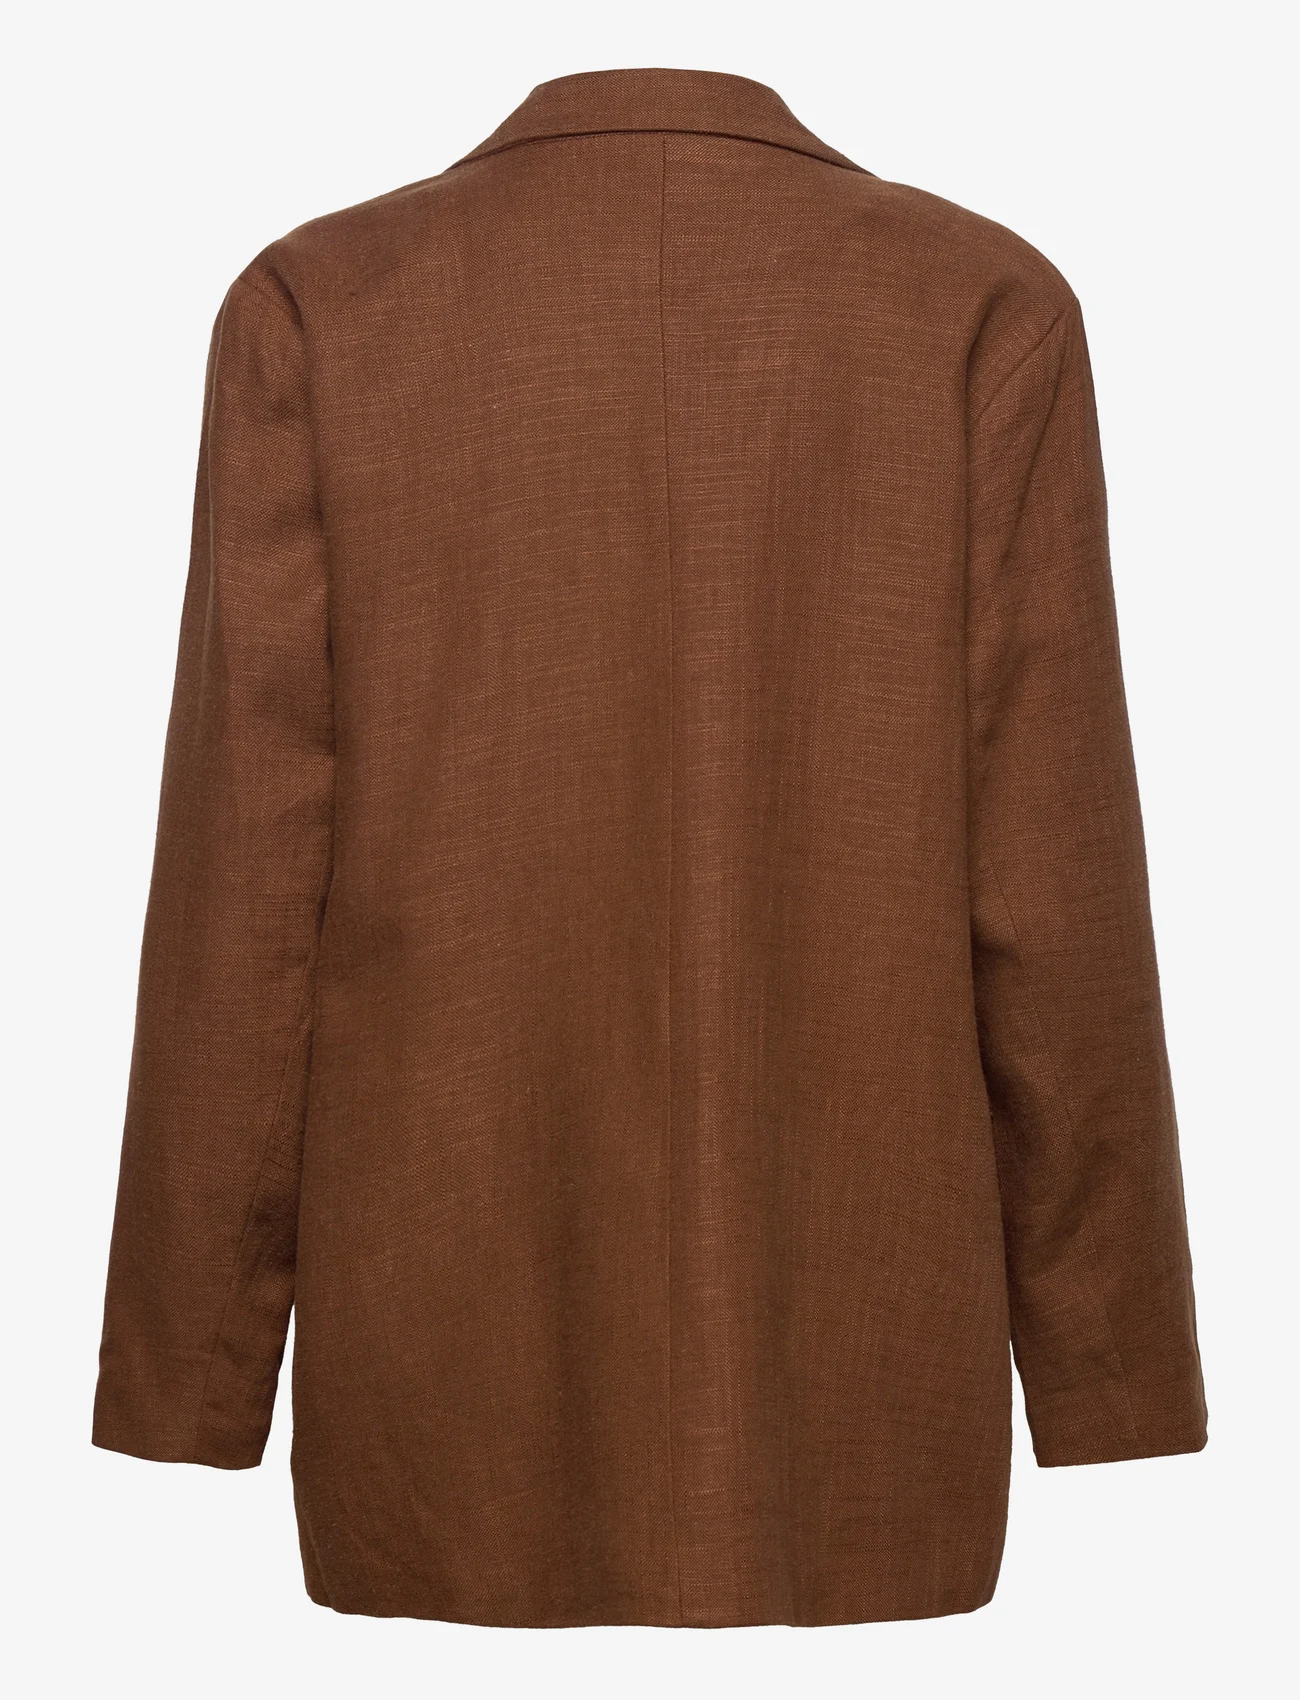 My Essential Wardrobe - LavitaMW Blazer - party wear at outlet prices - toffee brown - 1